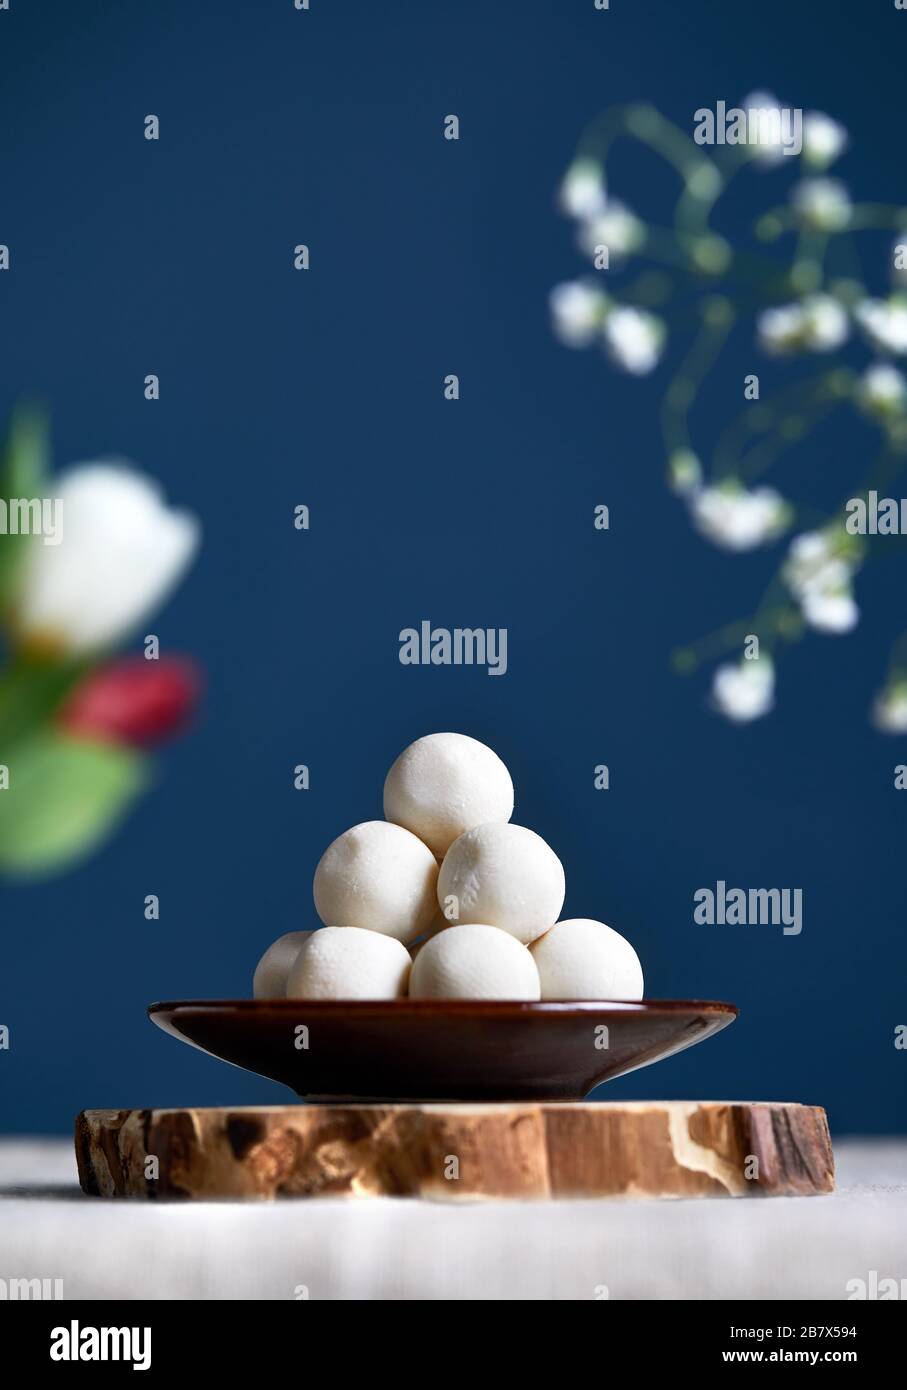 Kazakh and Kyrgyz national food kurt white salty balls from dry cheese around flowers during Nauryz festival at dark blue background. Free space for y Stock Photo